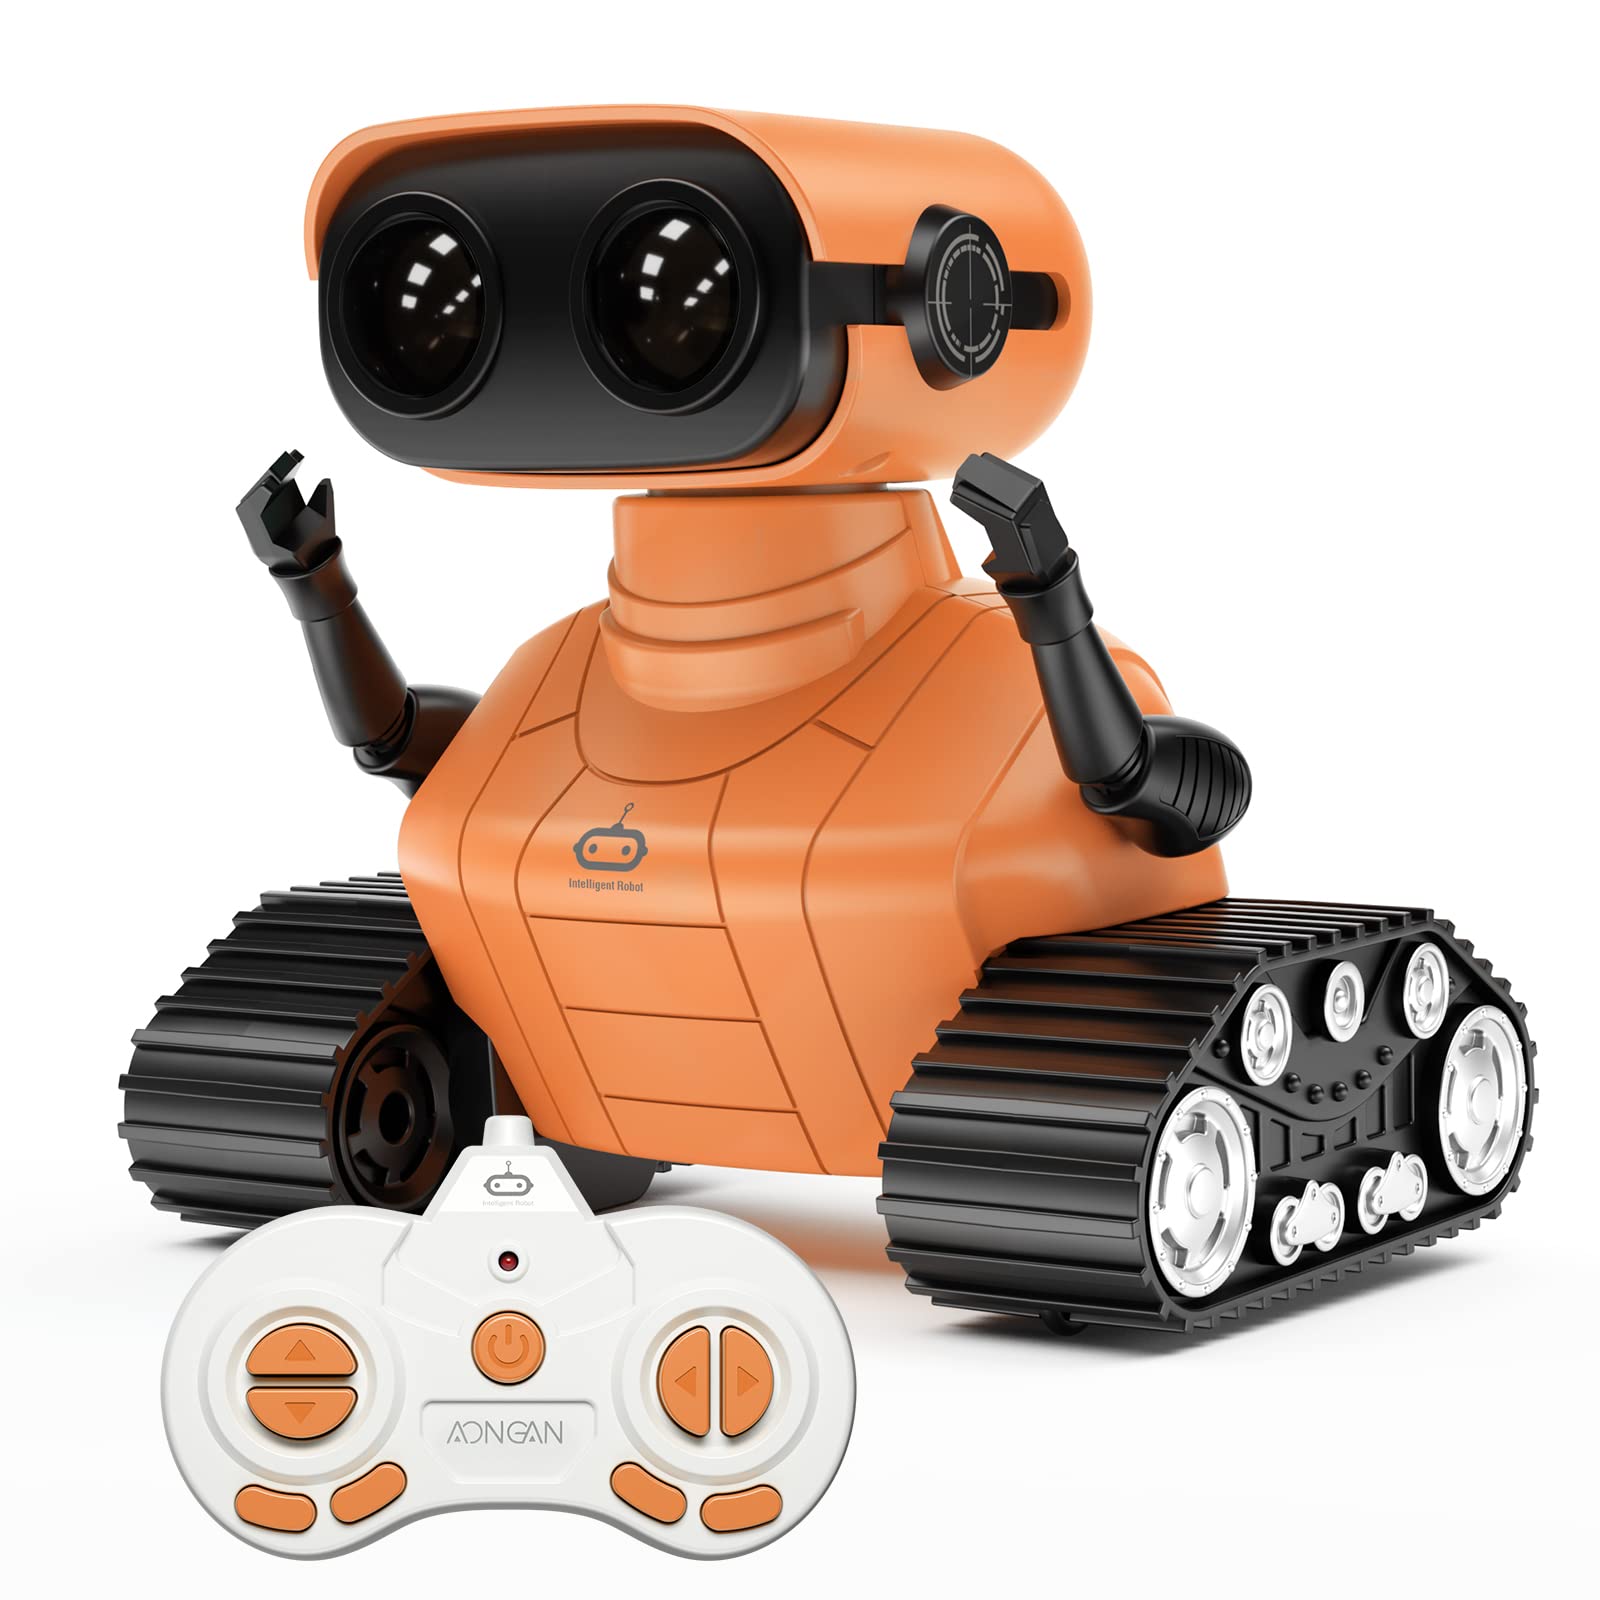 Aongan Robot Toys - Remote Control Robot Toys For Kids, Dancing Singing Music Led Eyes Demo, Interactive Engaging Robots, Usb Ch